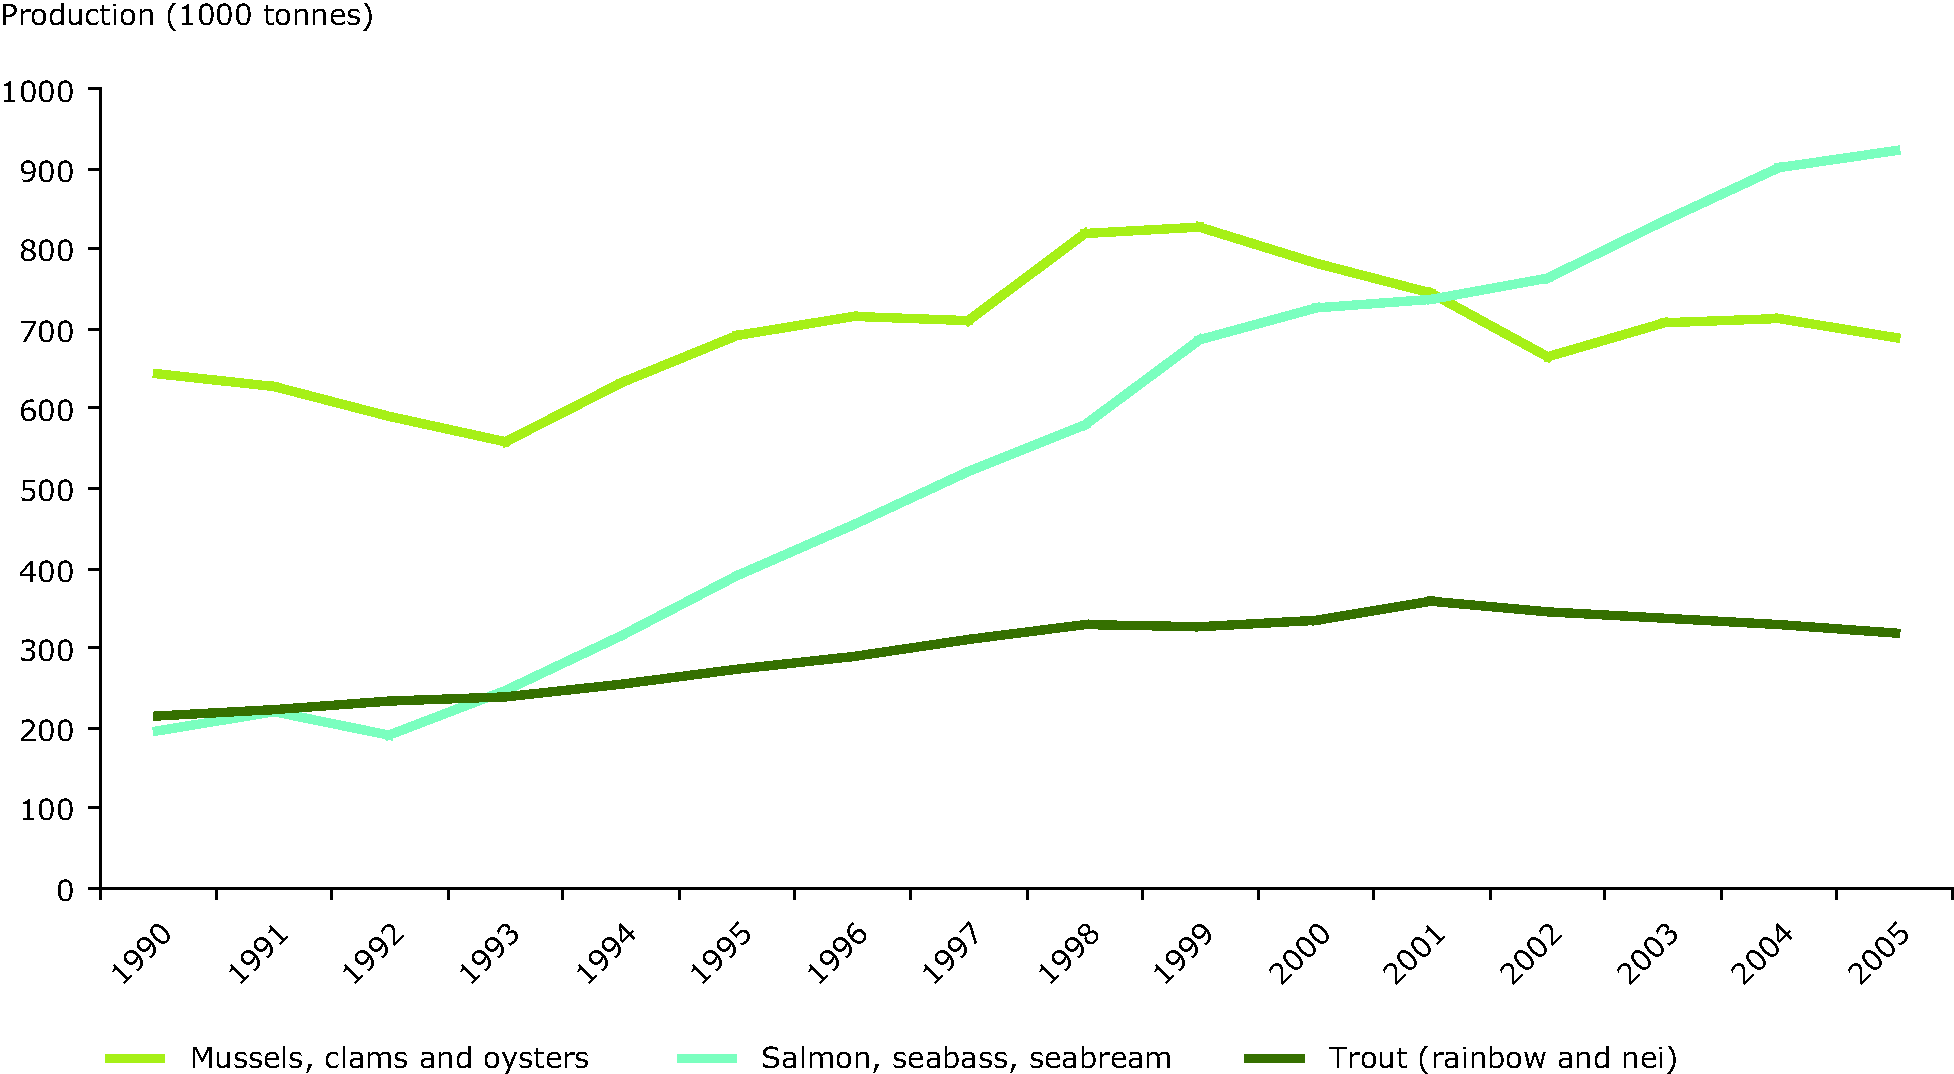 Annual production of major commercial aquaculture species groups, 1990 - 2005